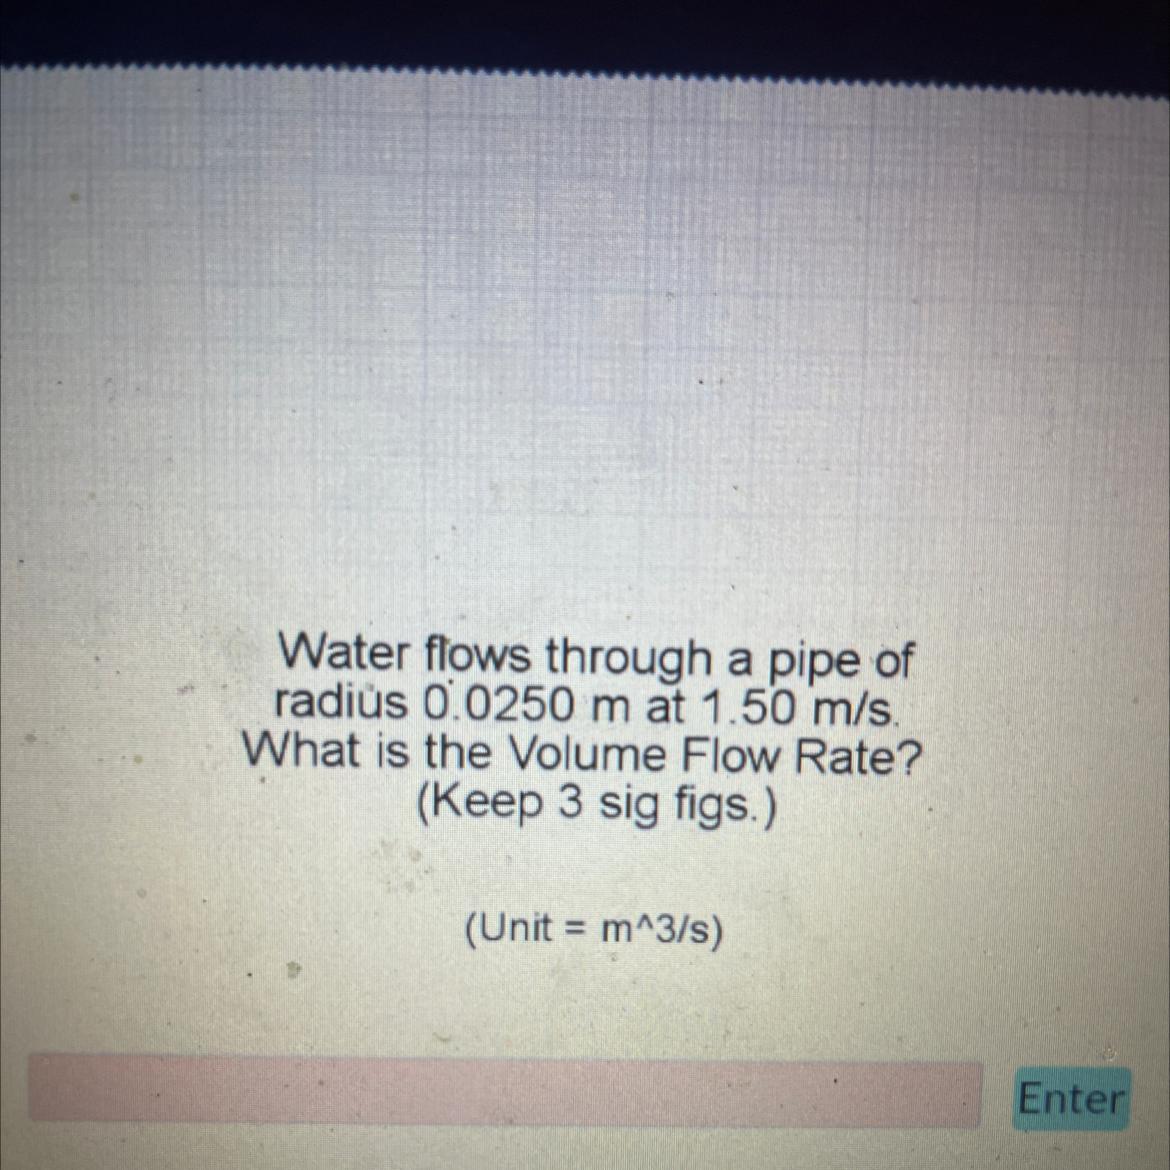 Water Flows Through A Pipe Ofradius 0.0250 M At 1.50 M/s.What Is The Volume Flow Rate?(Keep 3 Sig Figs.)I